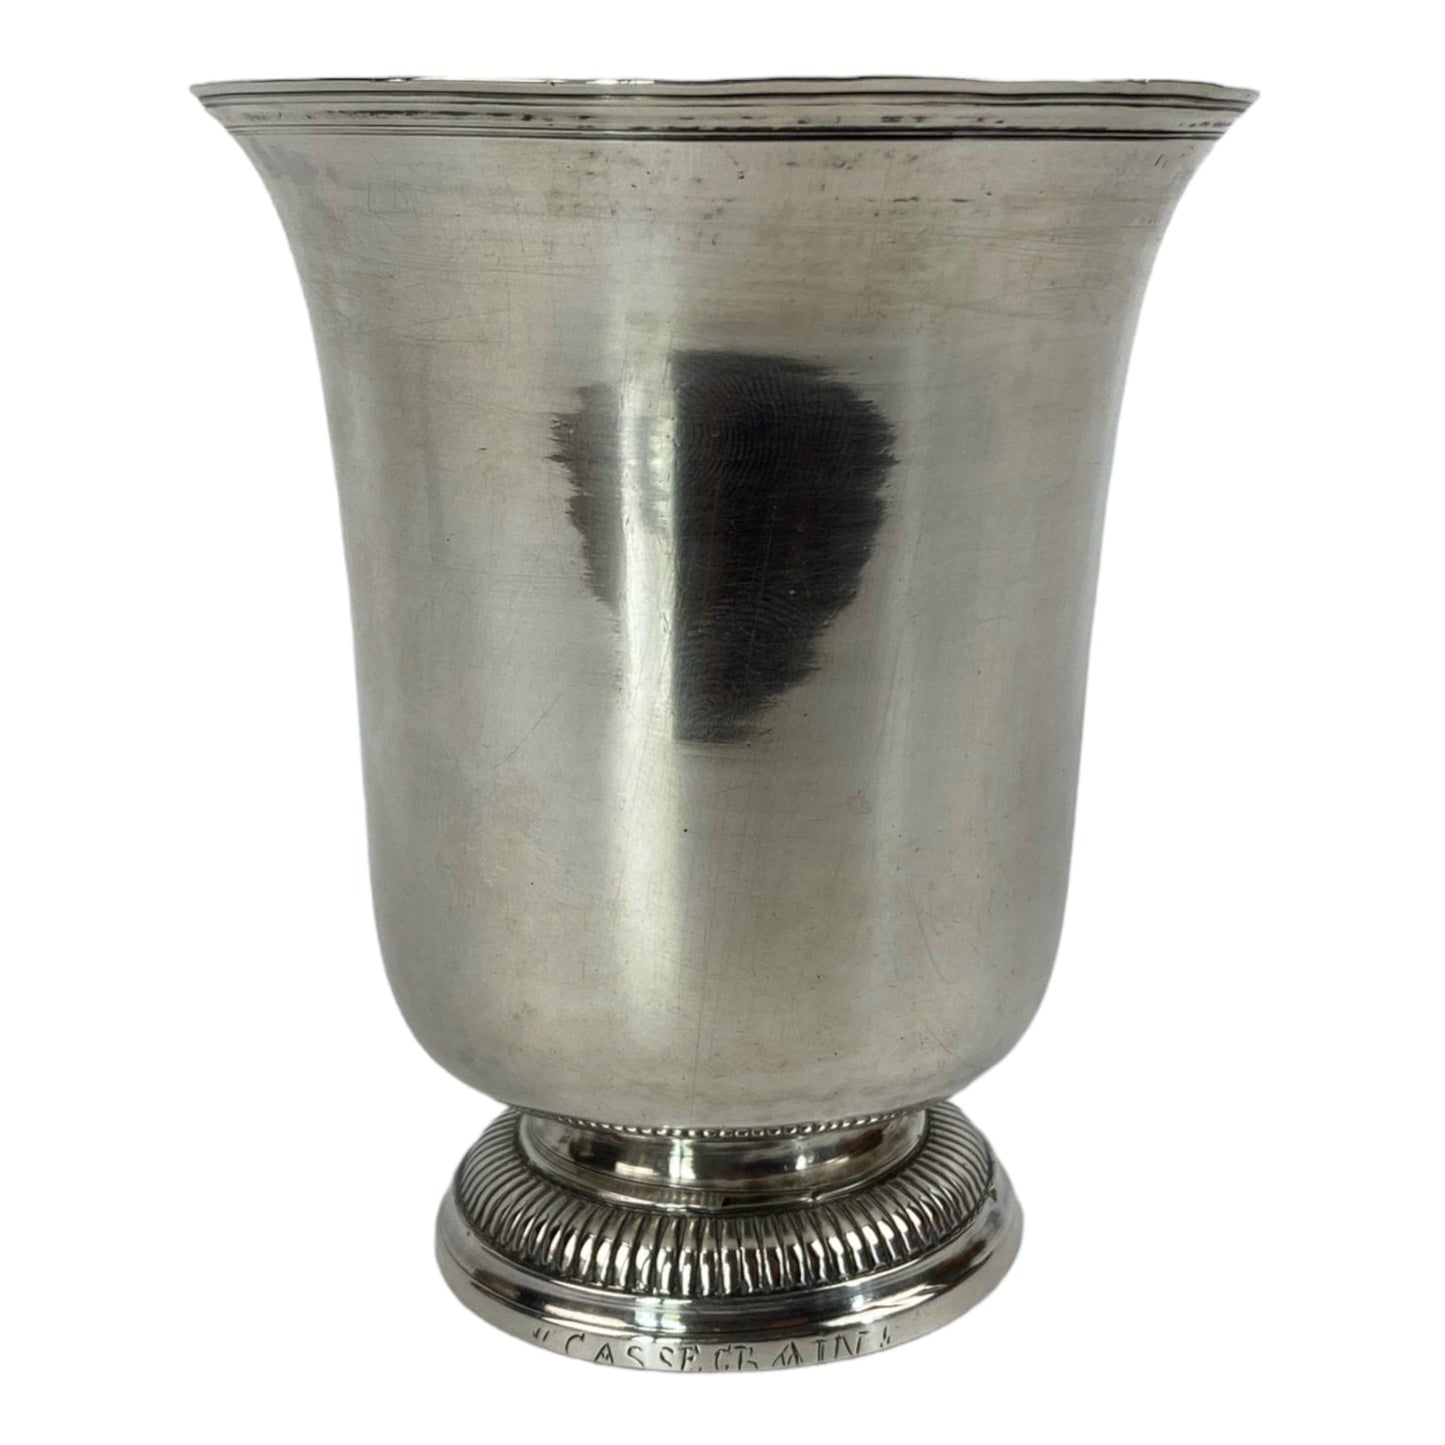 timbale argent massif XVIIIe siècle Orléans